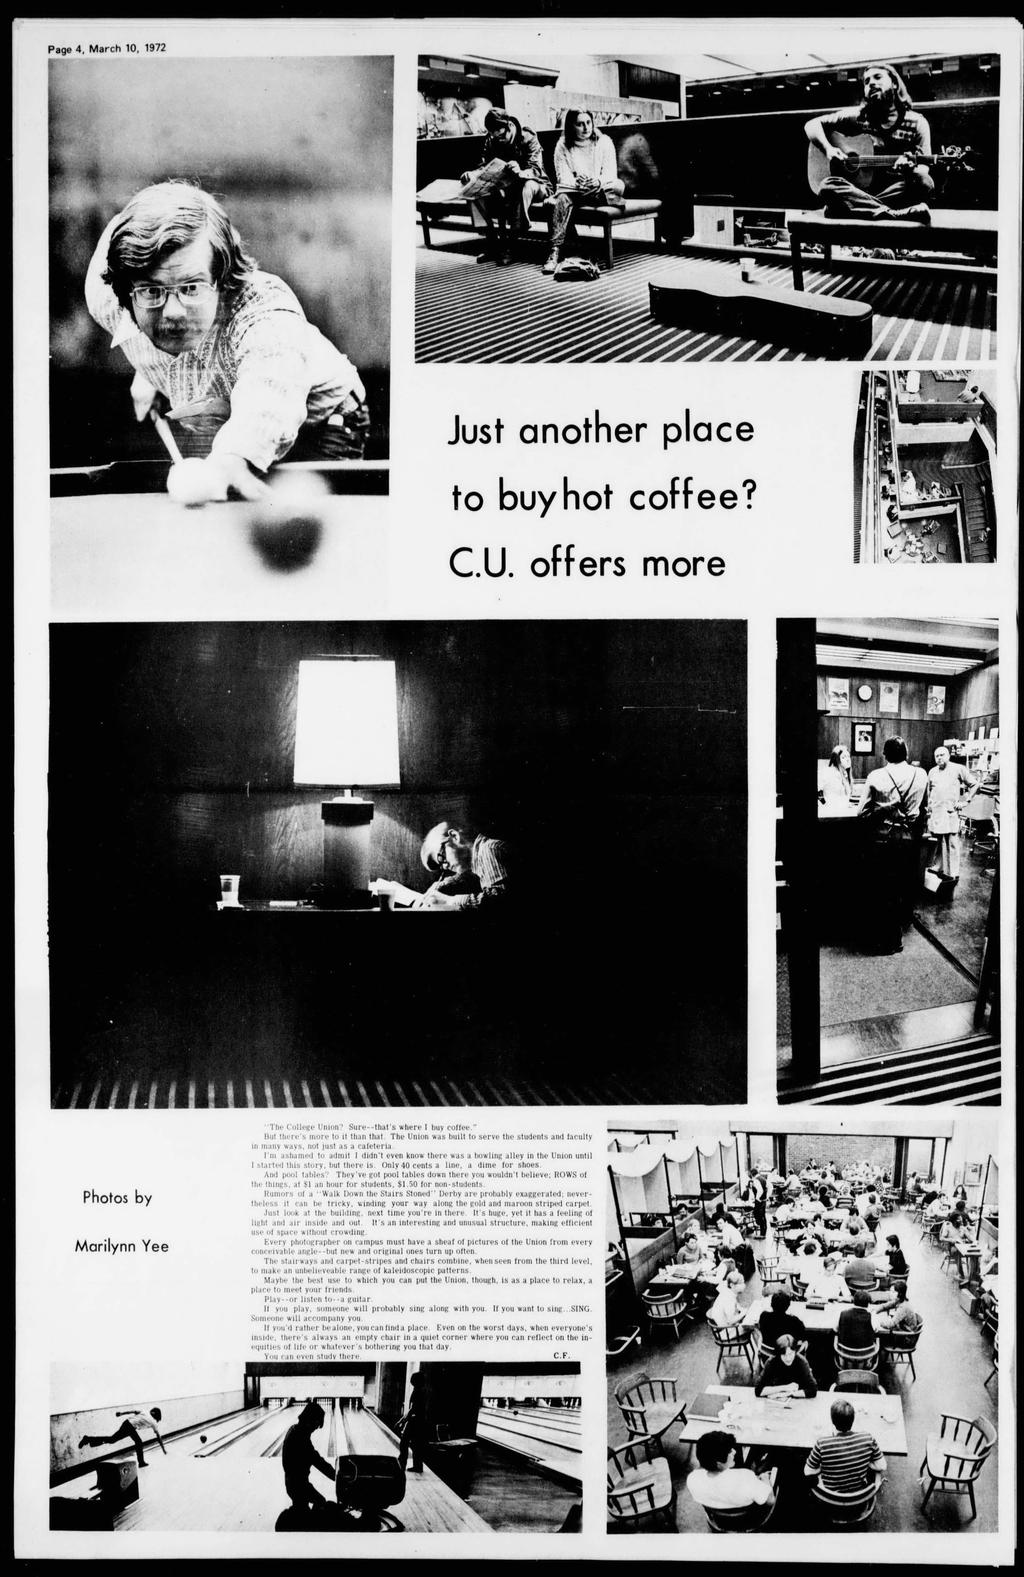 Pge 4, Mrch 10, 1972 Just nother plce to buyhot coffee? C.U. offers more Photos by Mrilynn Yee The College Union? Sure --tht s where buy coffee." But there s more to it thn tht.